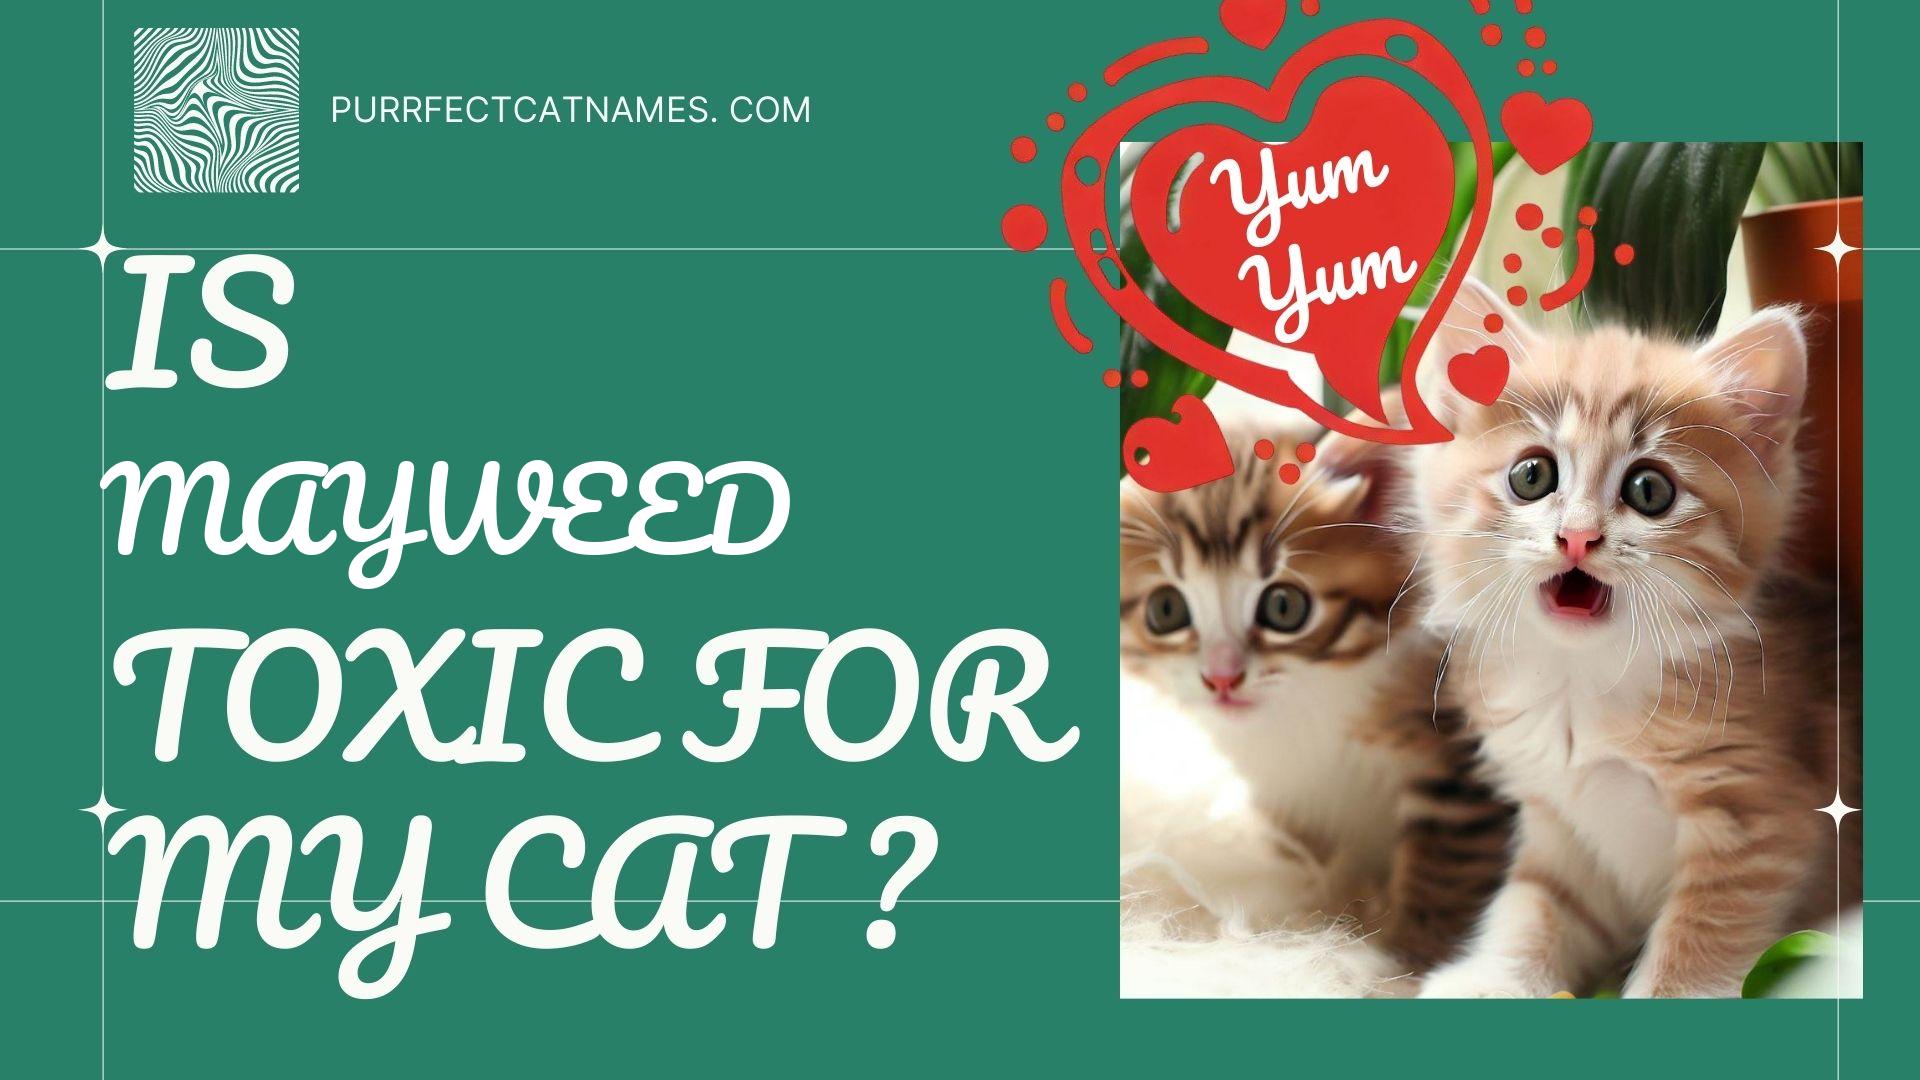 IsMayweed plant toxic for your cat